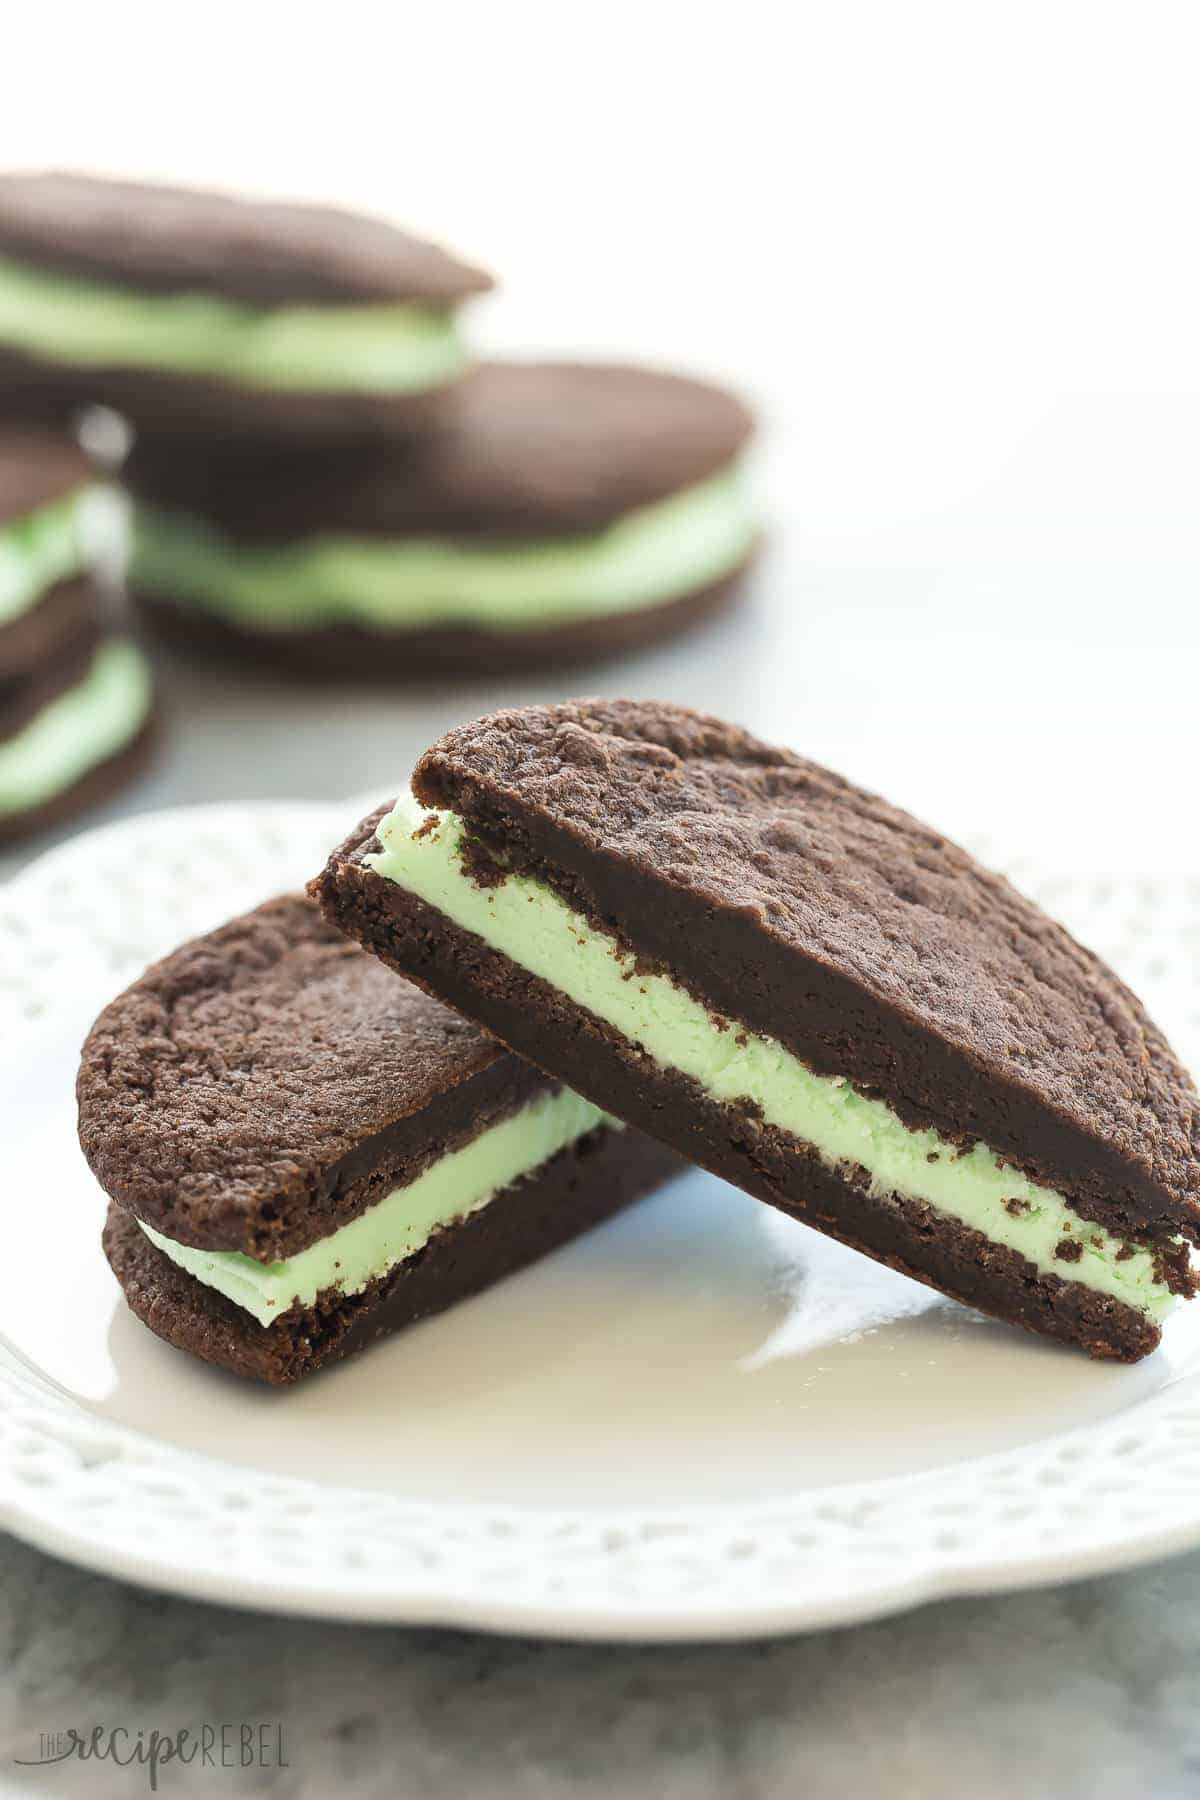 mint chocolate oreos homemade on white plate cut in half to reveal green frosting